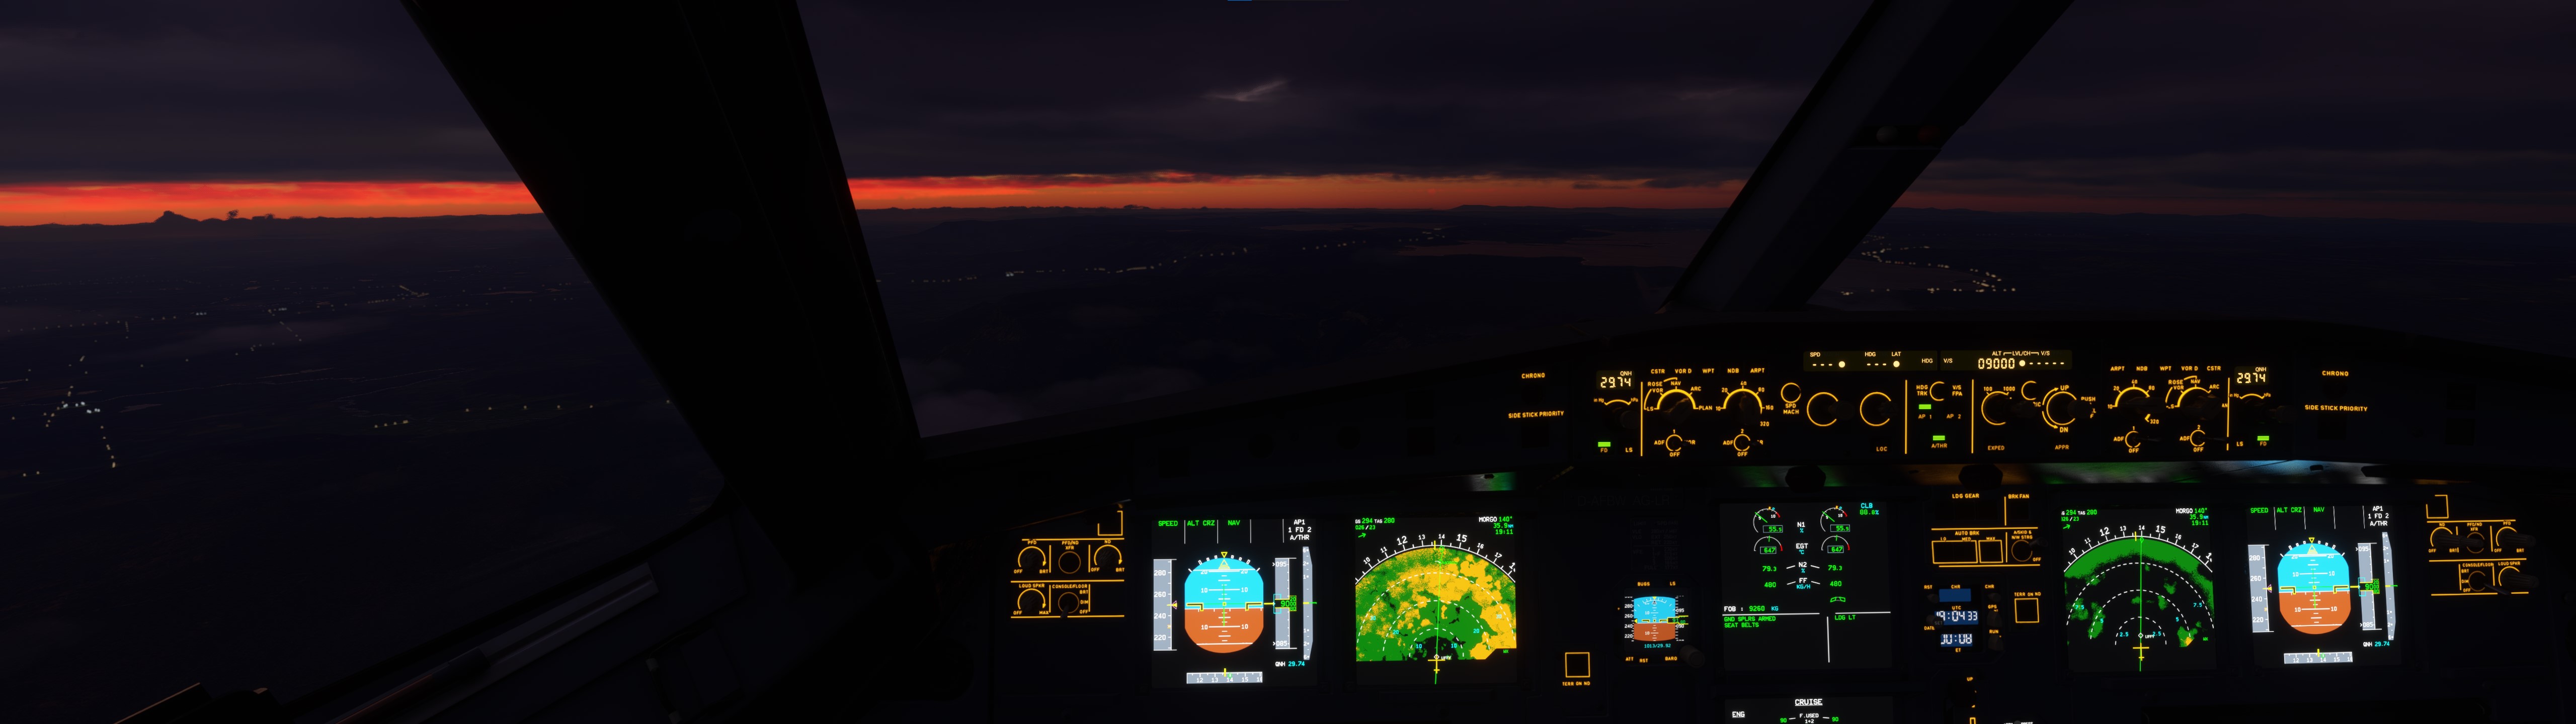 Wallpaper, flight simulator, flying, airbus a sky, clouds, cockpit, aircraft, airplane 5120x1440